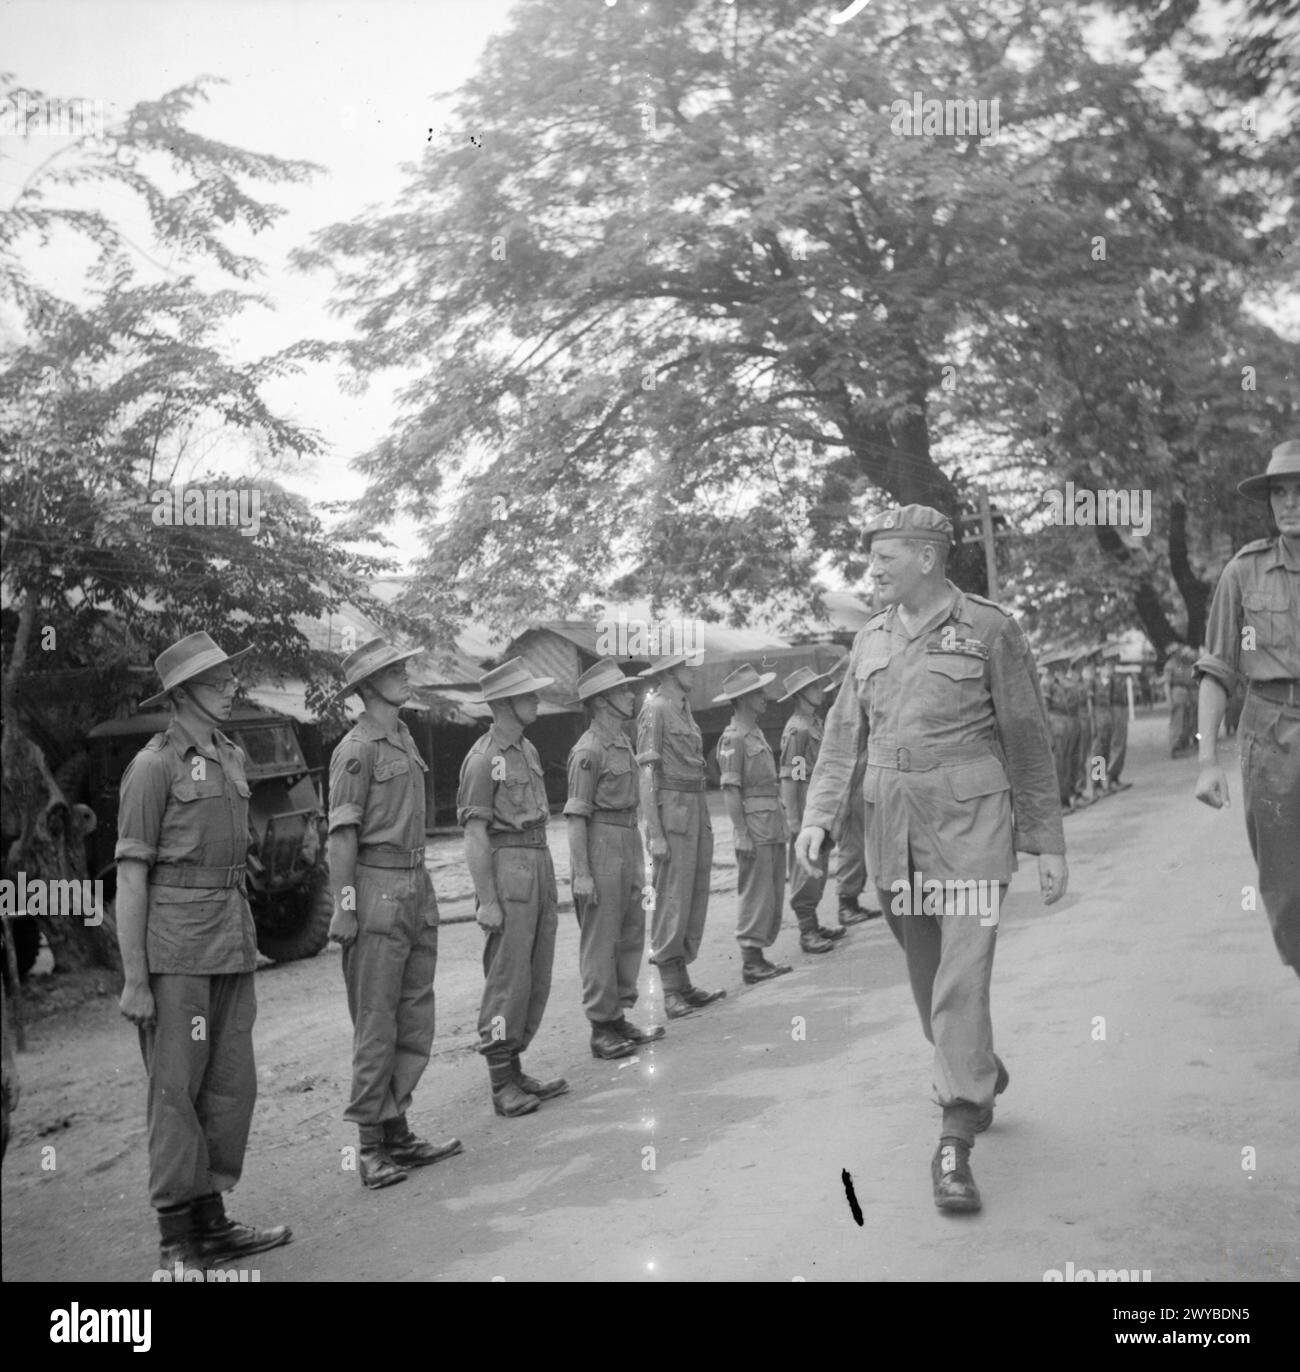 THE BRITISH ARMY IN BURMA 1945 - General Sir Claude Auchinleck, Commander-in-Chief India, inspecting troops, 1 August 1945. , Auchinleck, Claude John Eyre, British Army Stock Photo